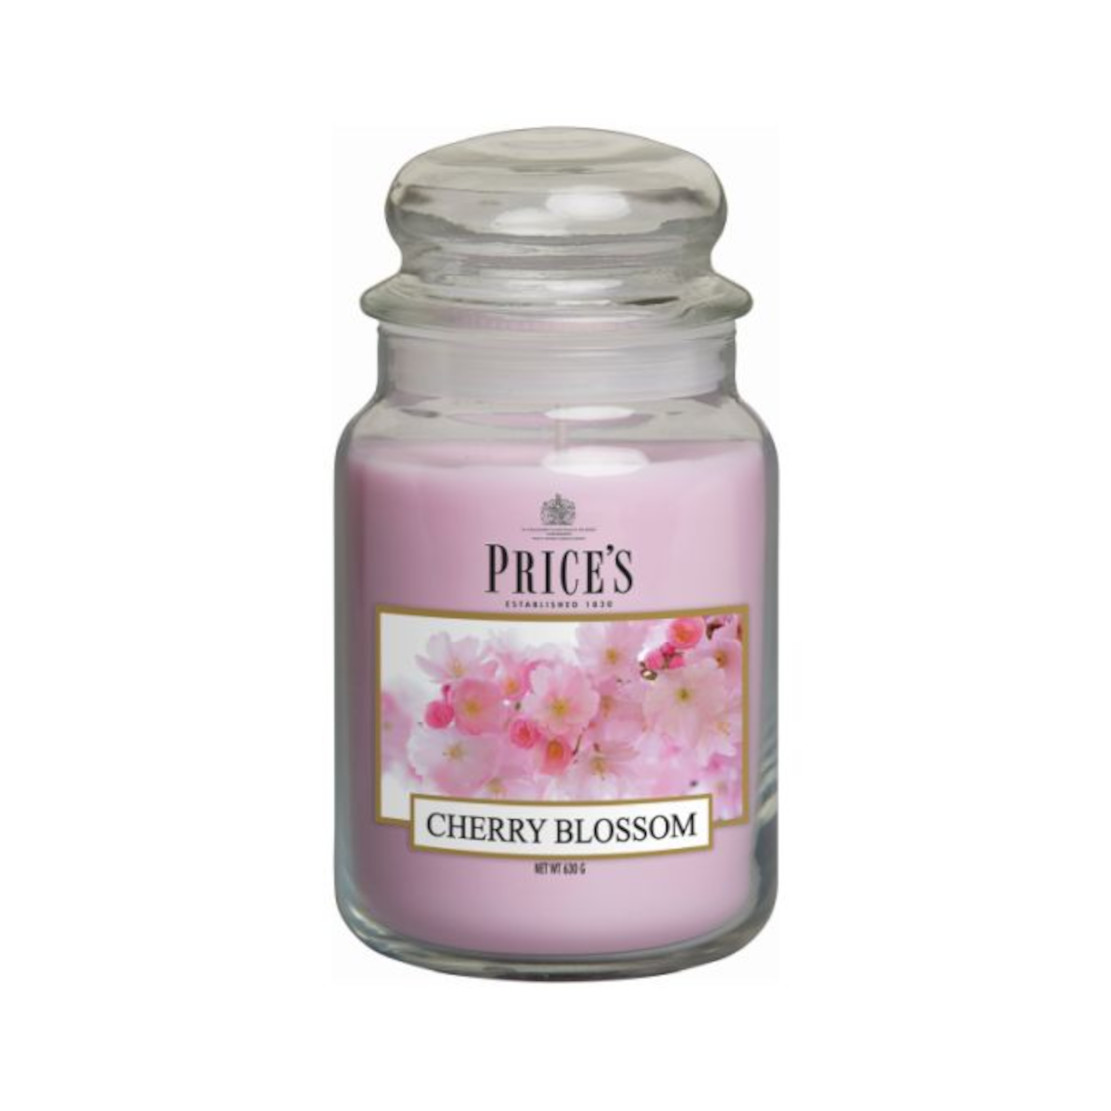 Prices Candles Cherry Blossom Large Jar